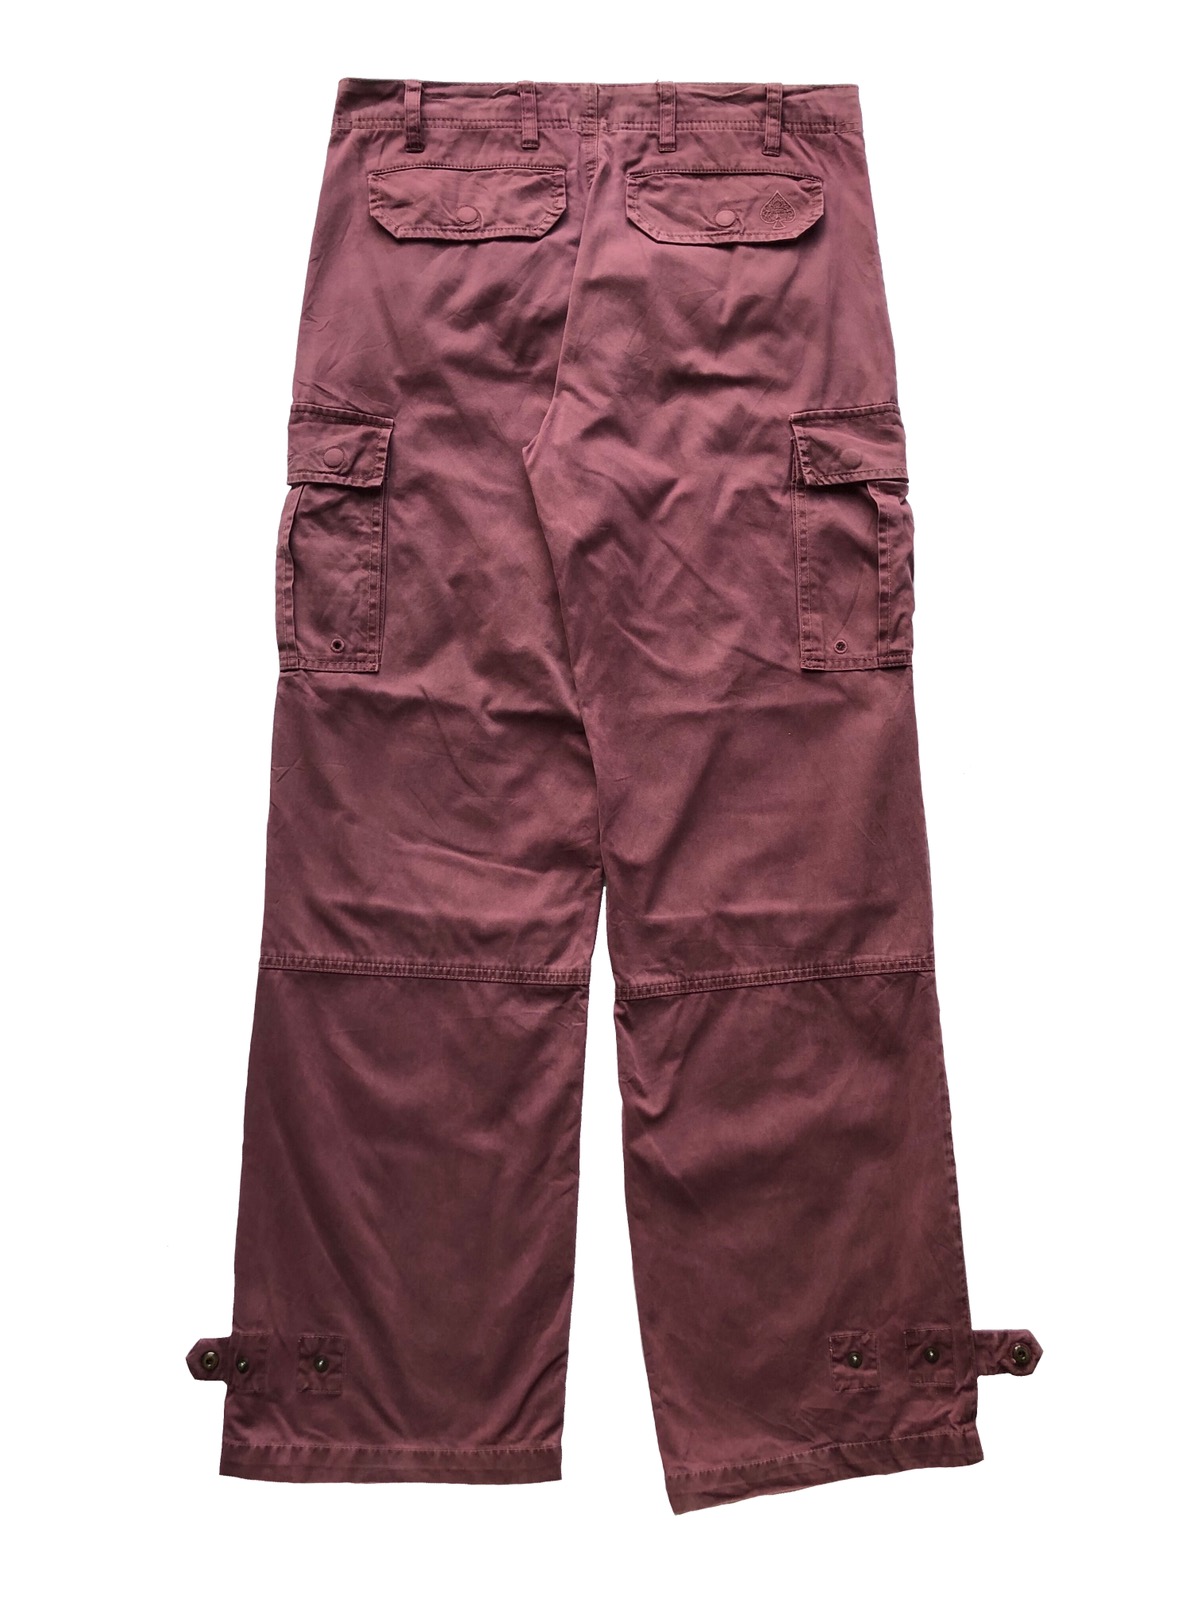 Japanese Brand - 1990s 291295 Homme Military Cargo Trousers - 2